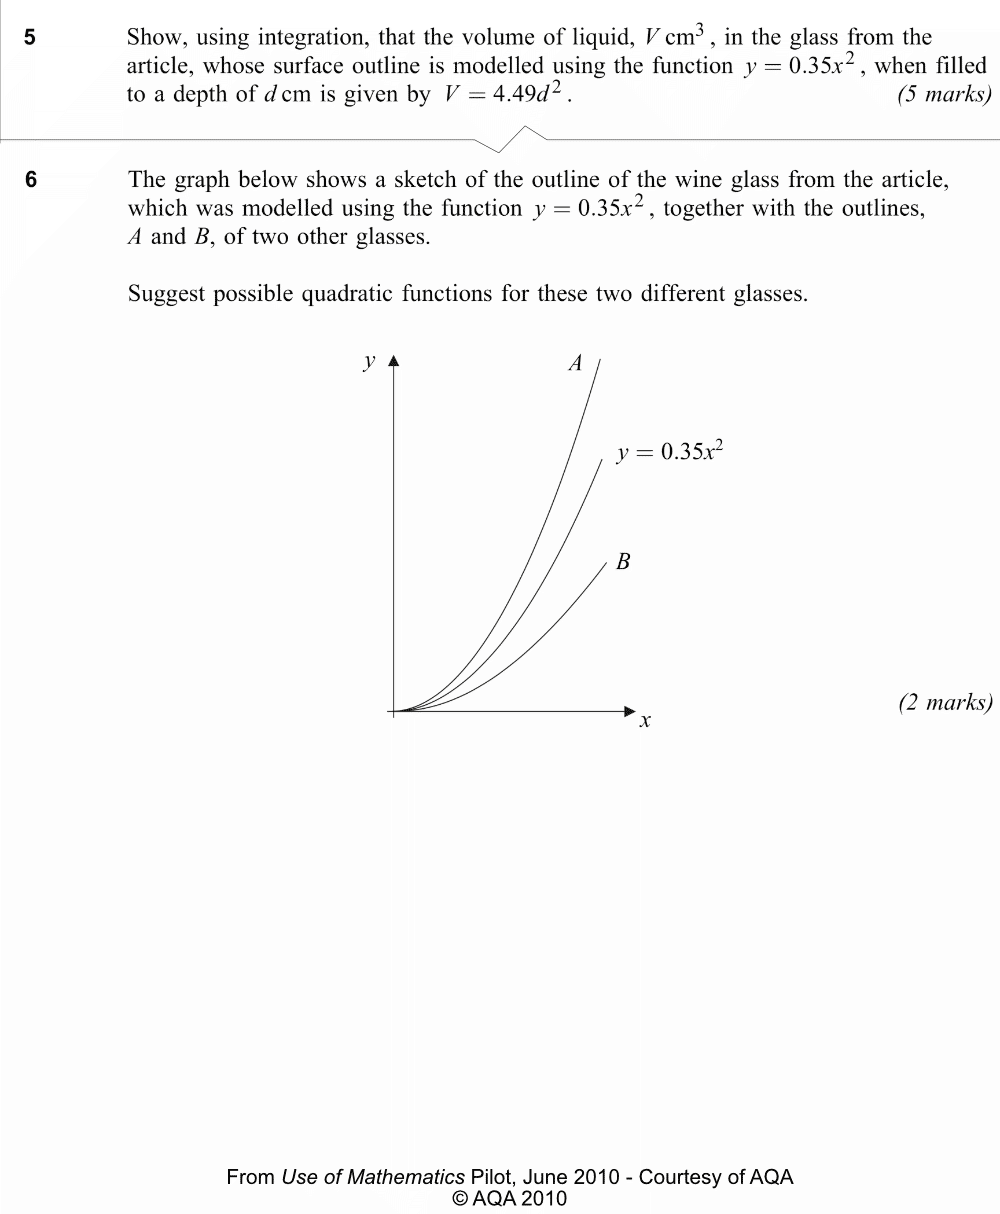 Questions from AQA test